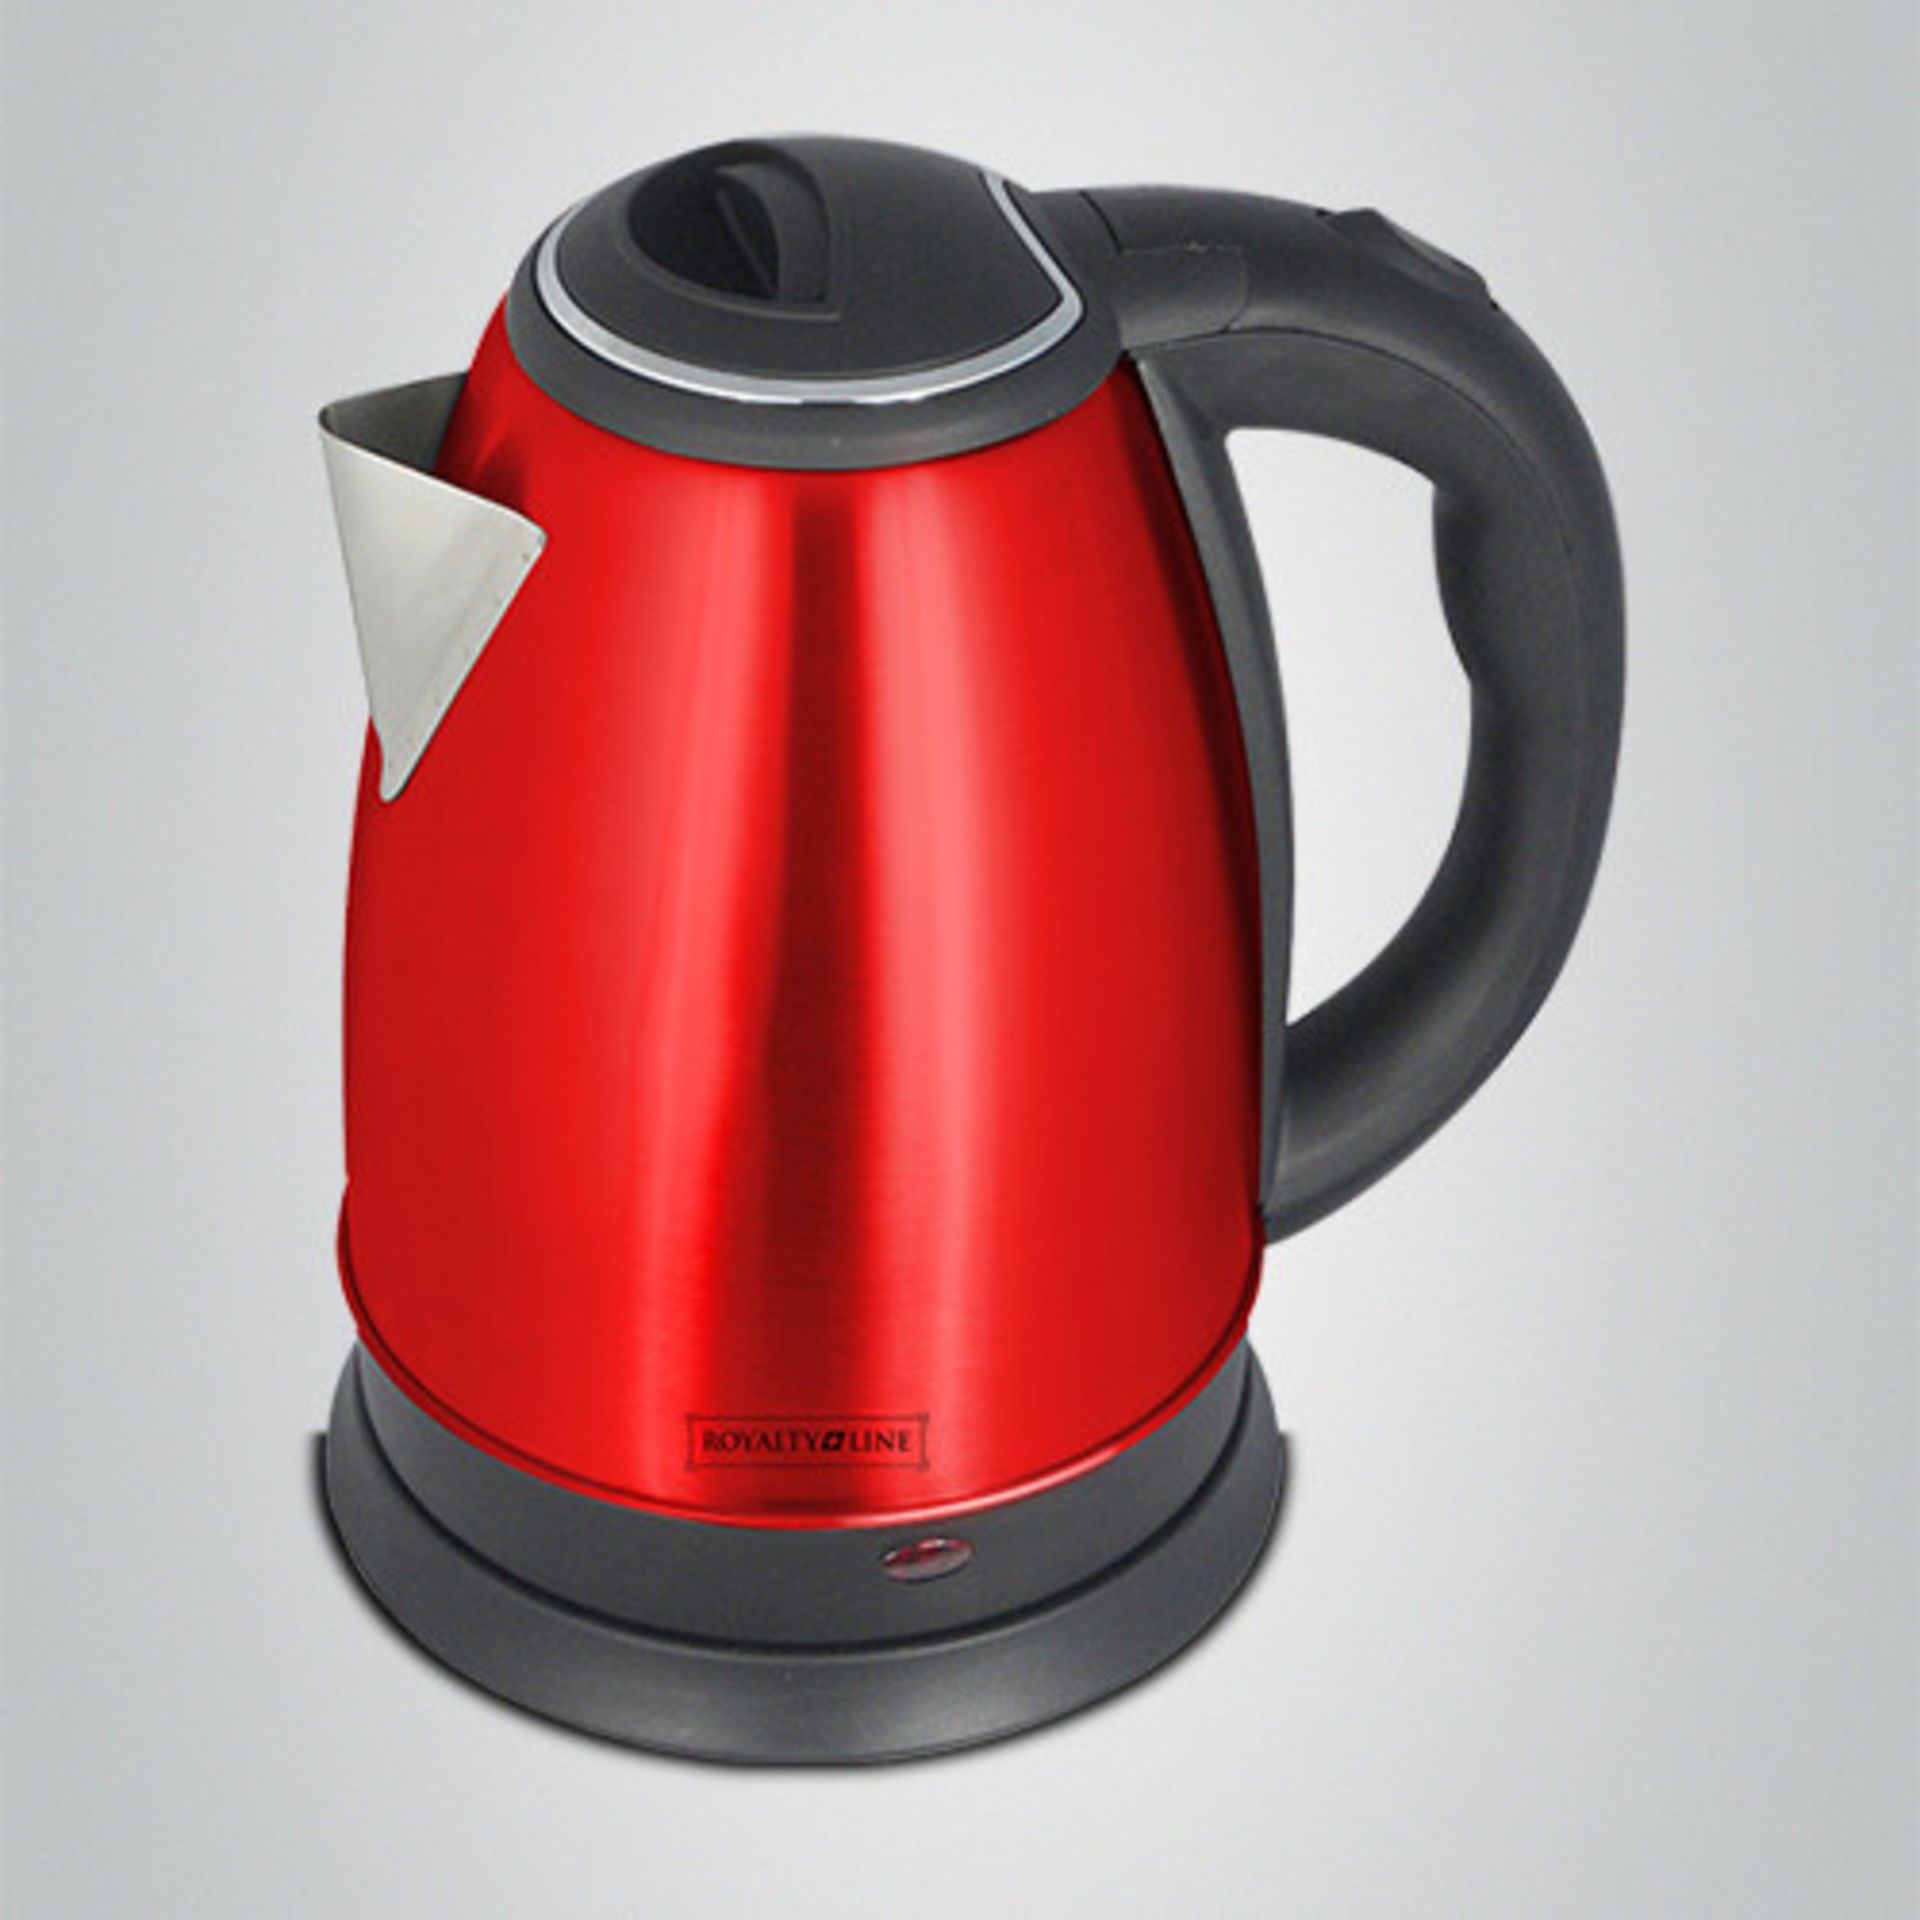 V Brand New High Quality 1.8L Red Stainless Steel Water Kettle with Cord Storage and Rotating